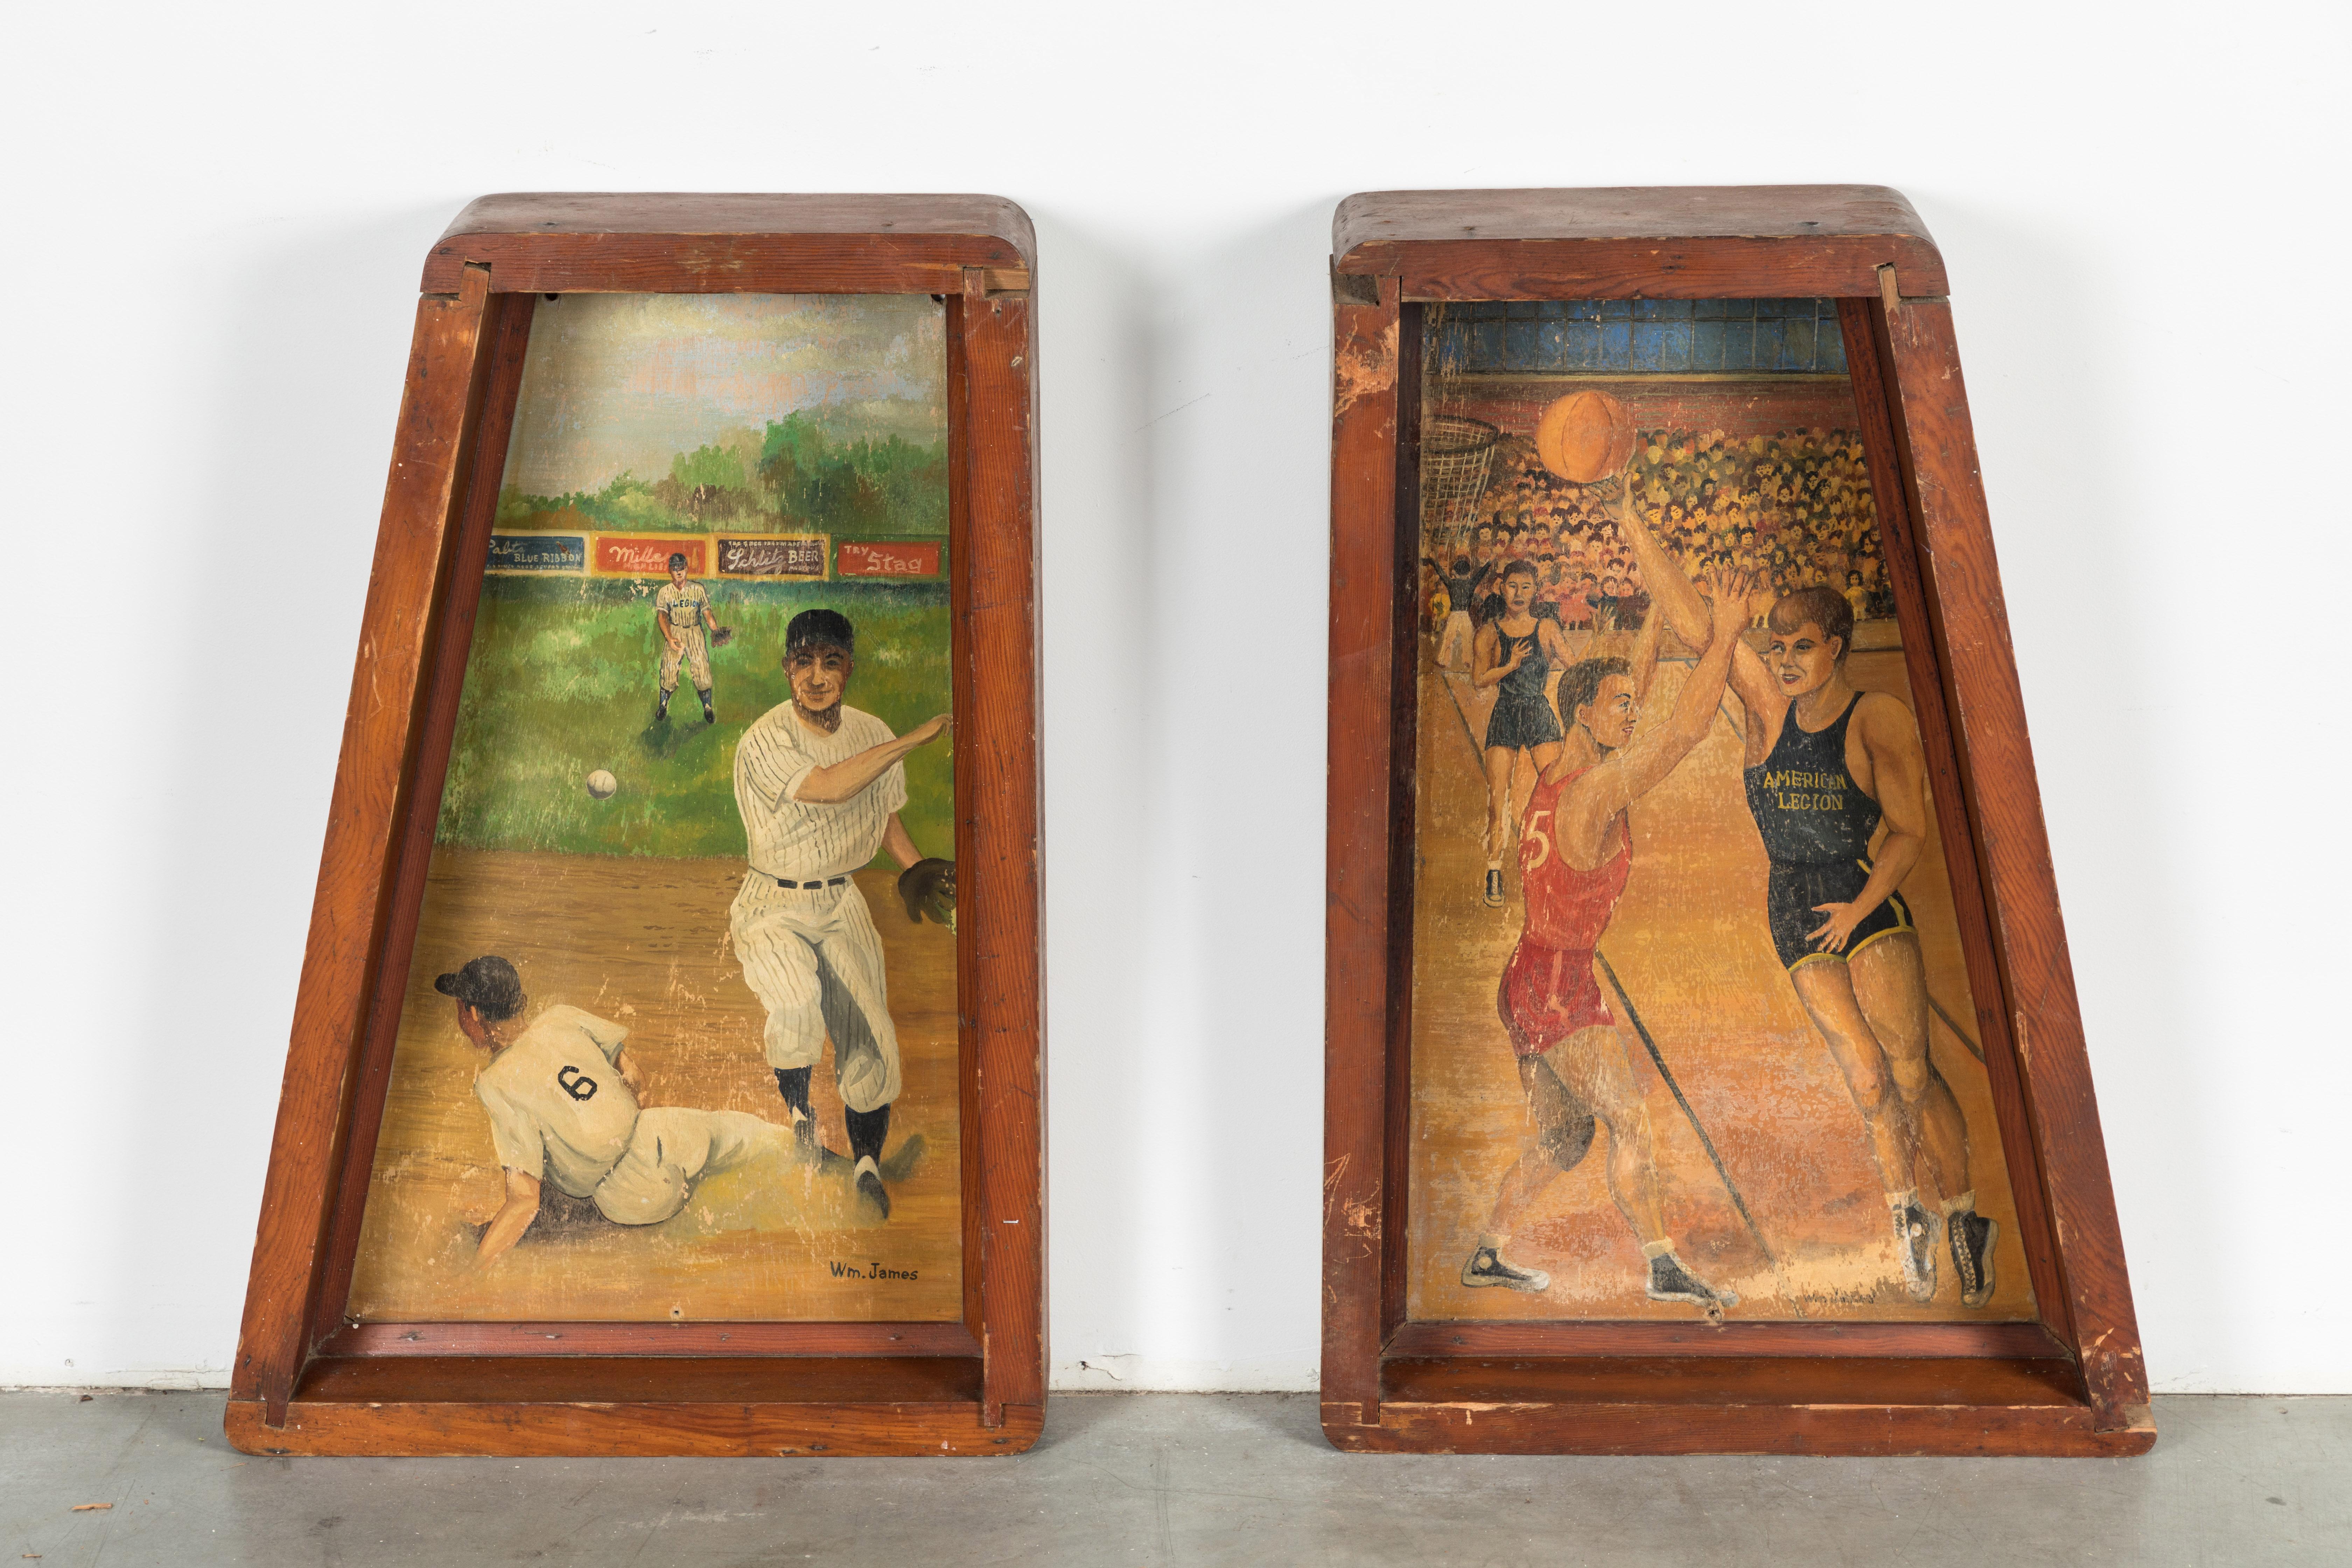 Pair of baseball and basketball paintings found in a Midwestern American Legion hall. These were proudly displayed behind the legion hall bar. Great sports related subject matter. Baseball painting shows beer advertising in the background for Pabst,